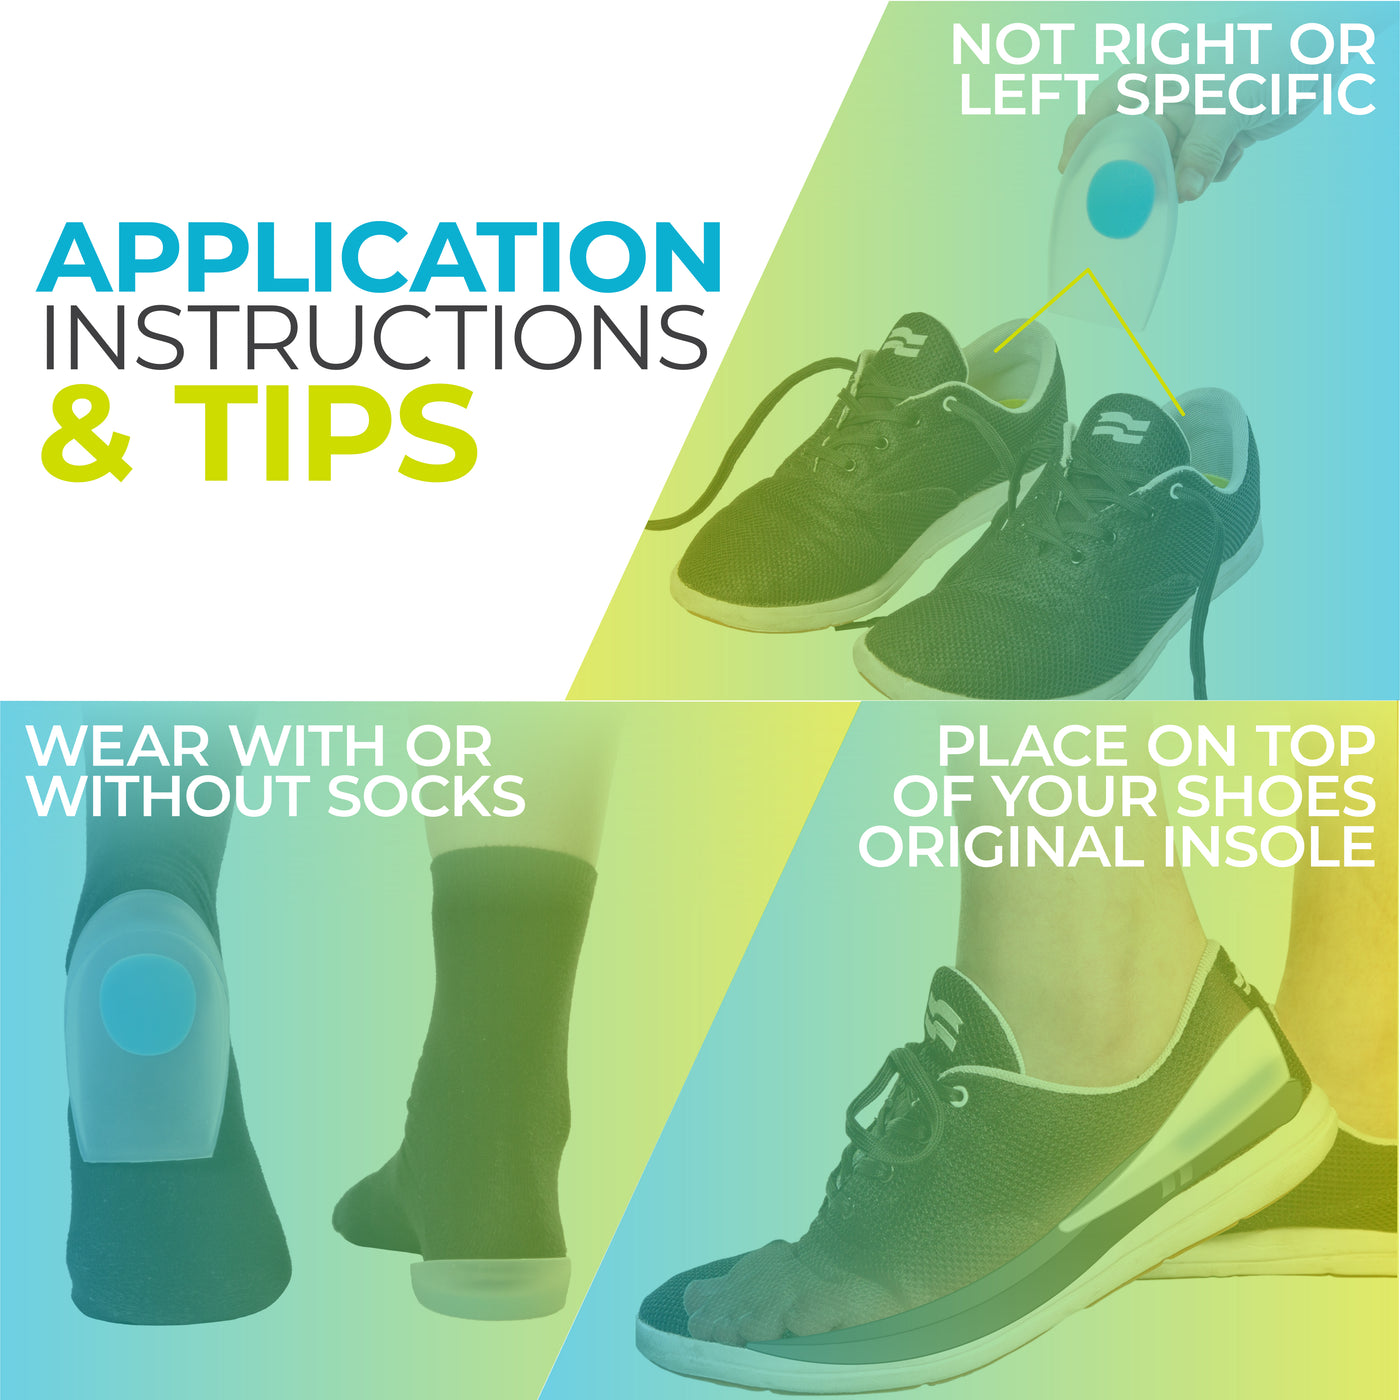 the shoe inserts for plantar fasciitis can be worn with or without socks